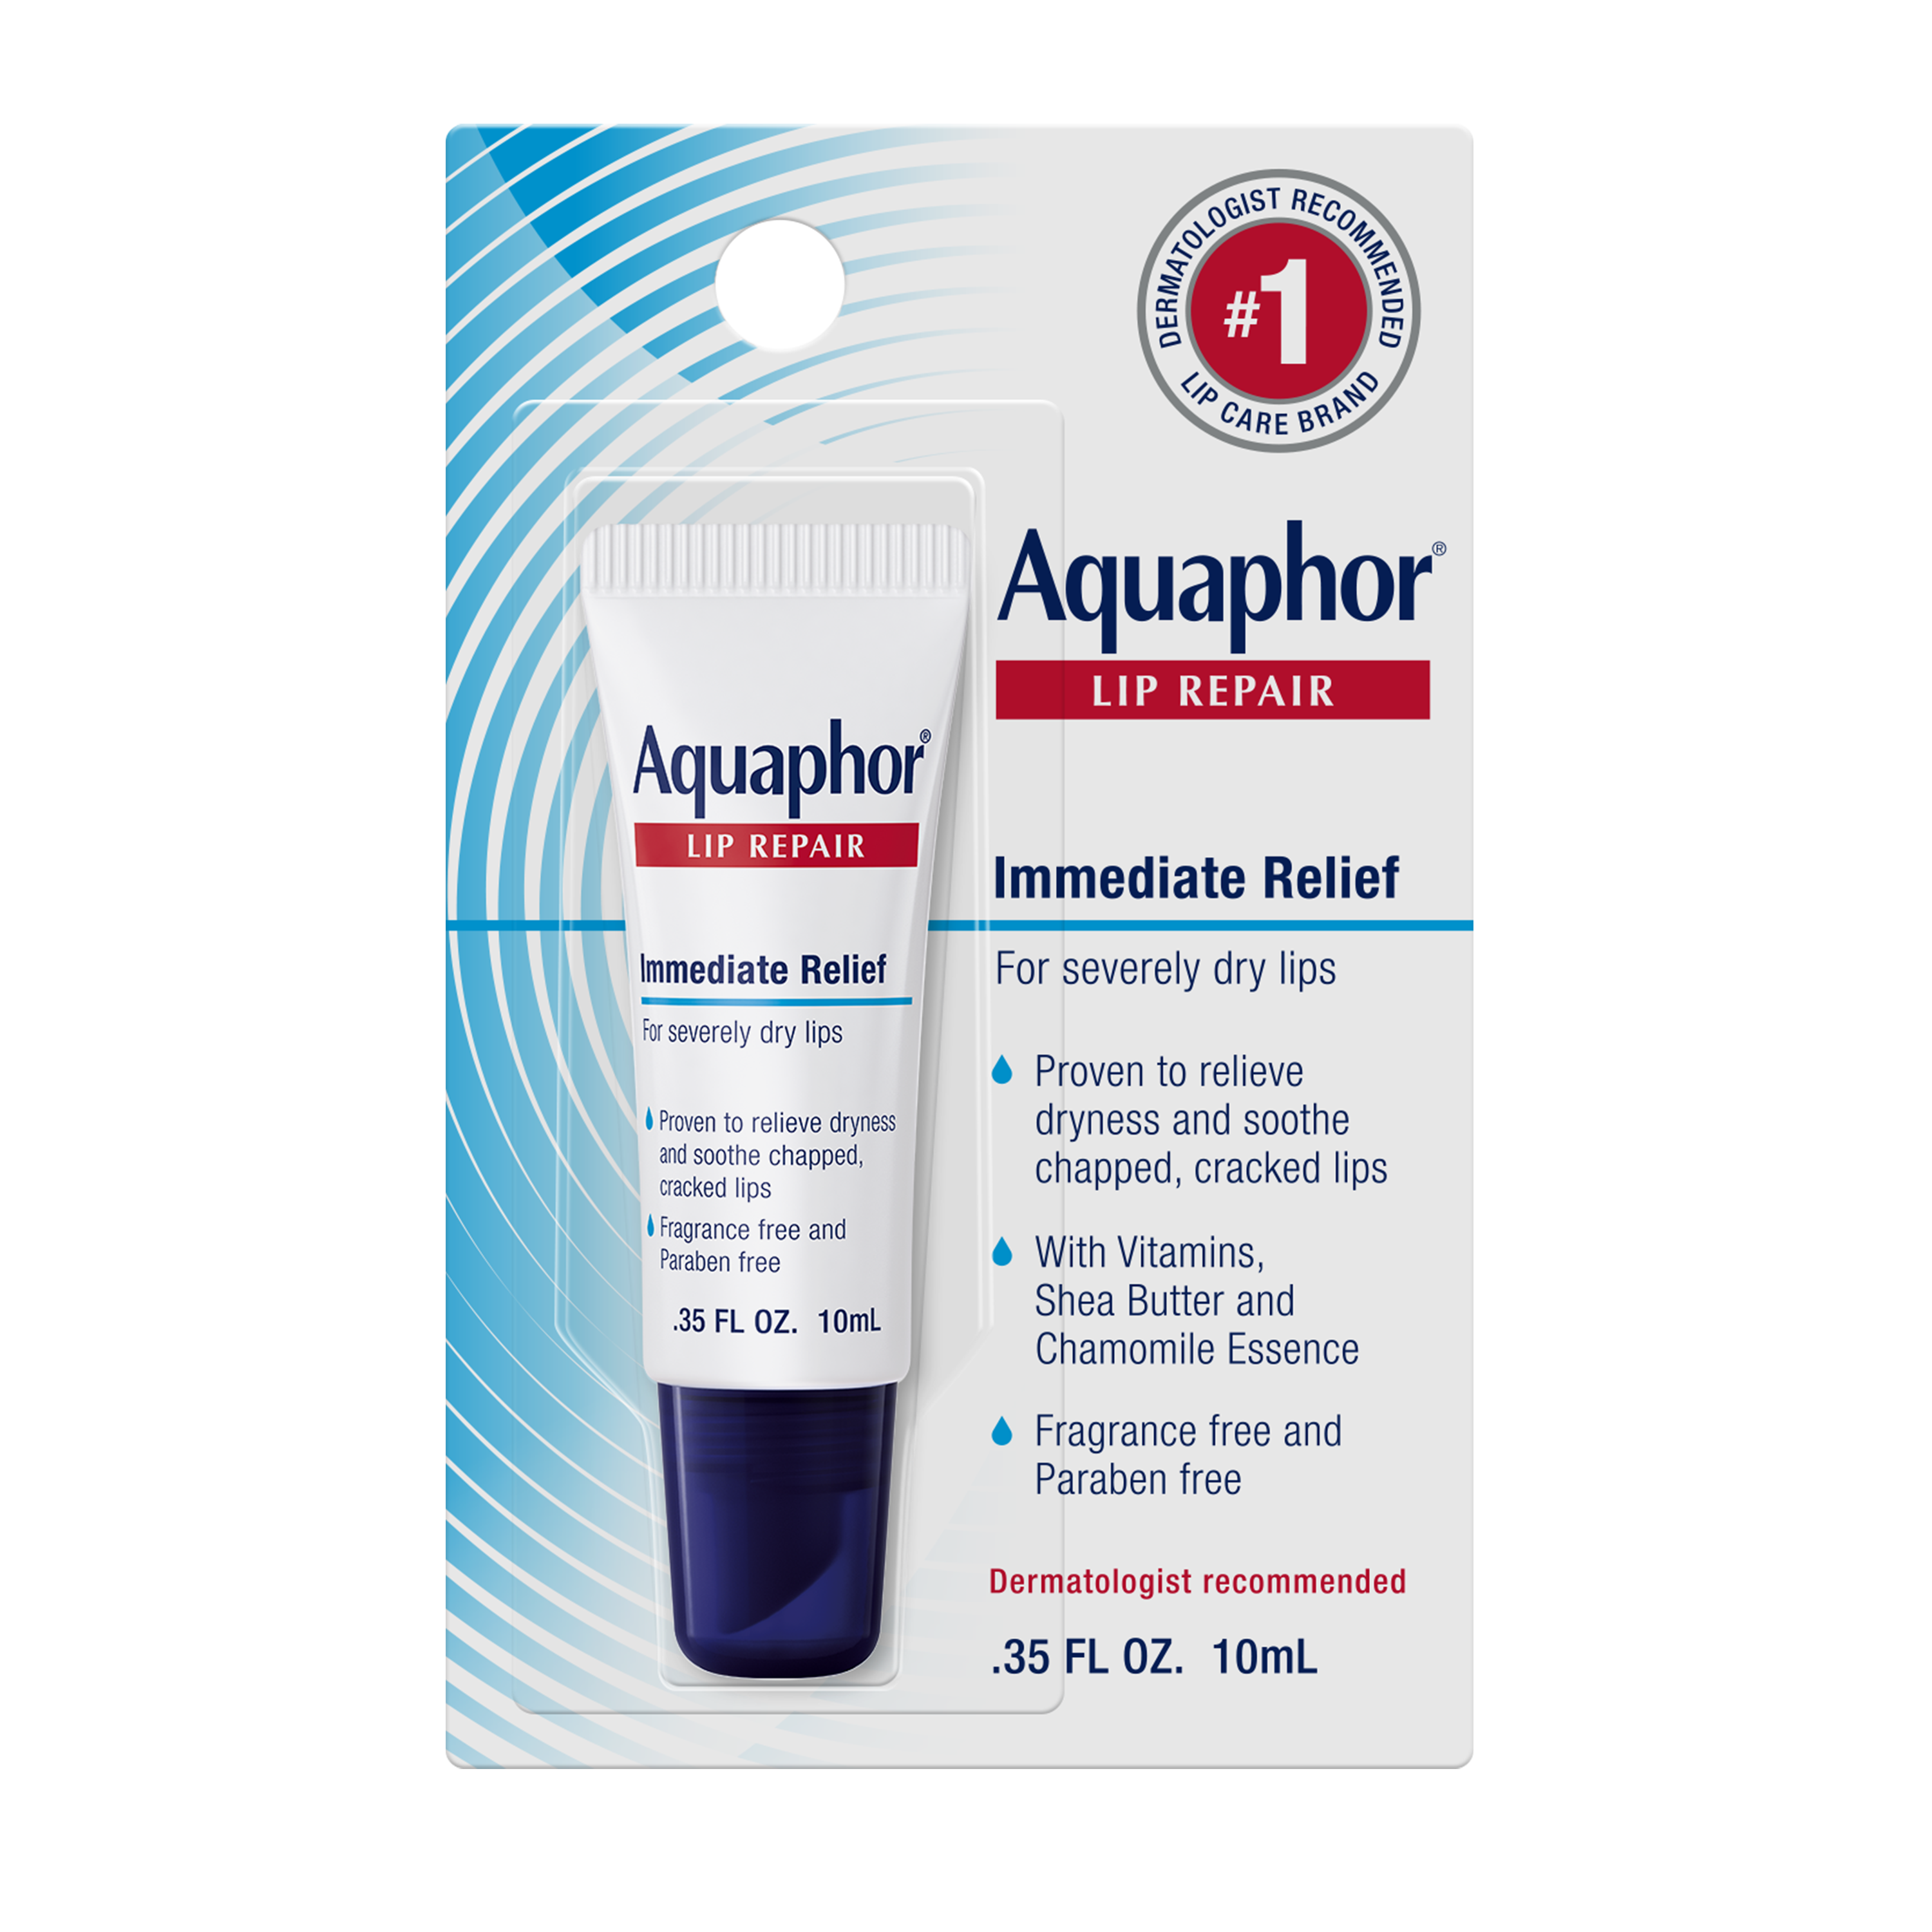 Aquaphor Lip Repair Ointment, Long-lasting Moisture to Soothe Dry Chapped Lips, .35 fl. oz. Tube - image 1 of 9